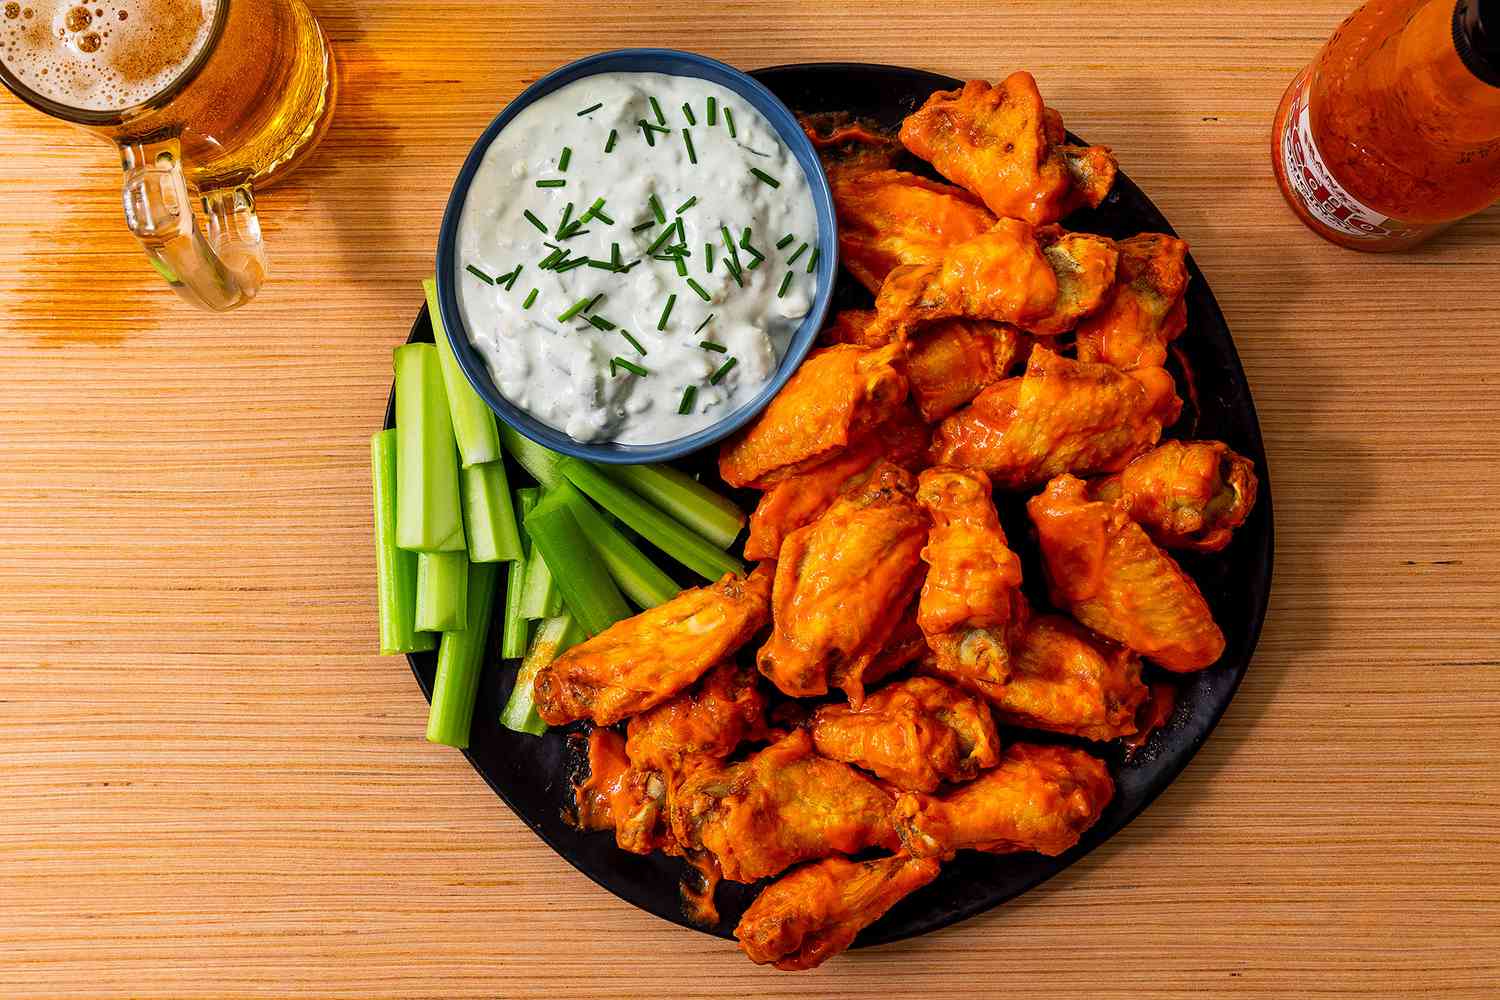 How to Make Chicken Wings with These Tasty Recipes